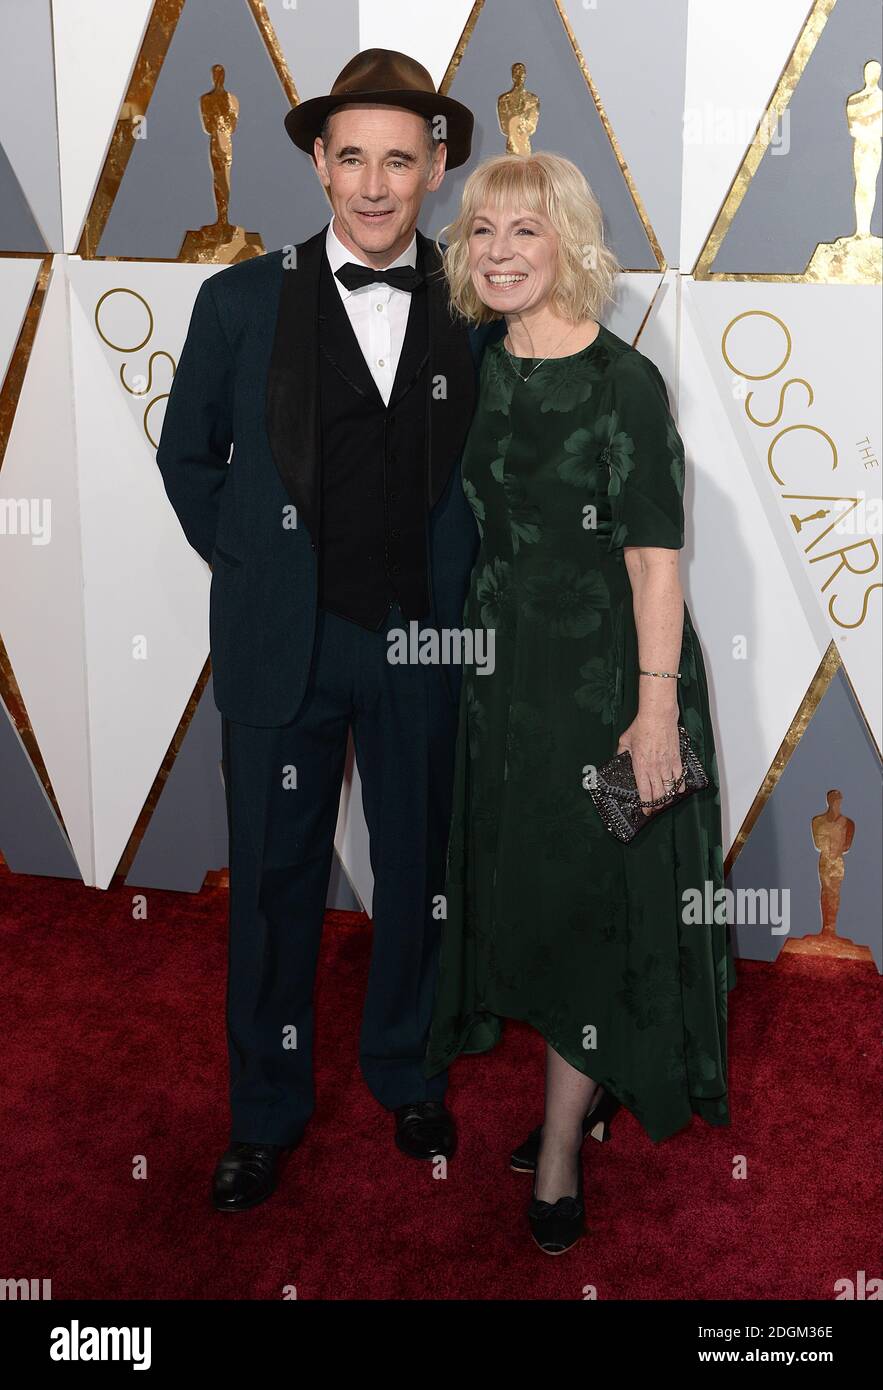 Mark Rylance and Claire van Kampen arriving at the 88th Academy Awards held at the Dolby Theatre in Hollywood, Los Angeles, CA, USA, February 28, 2016. Stock Photo